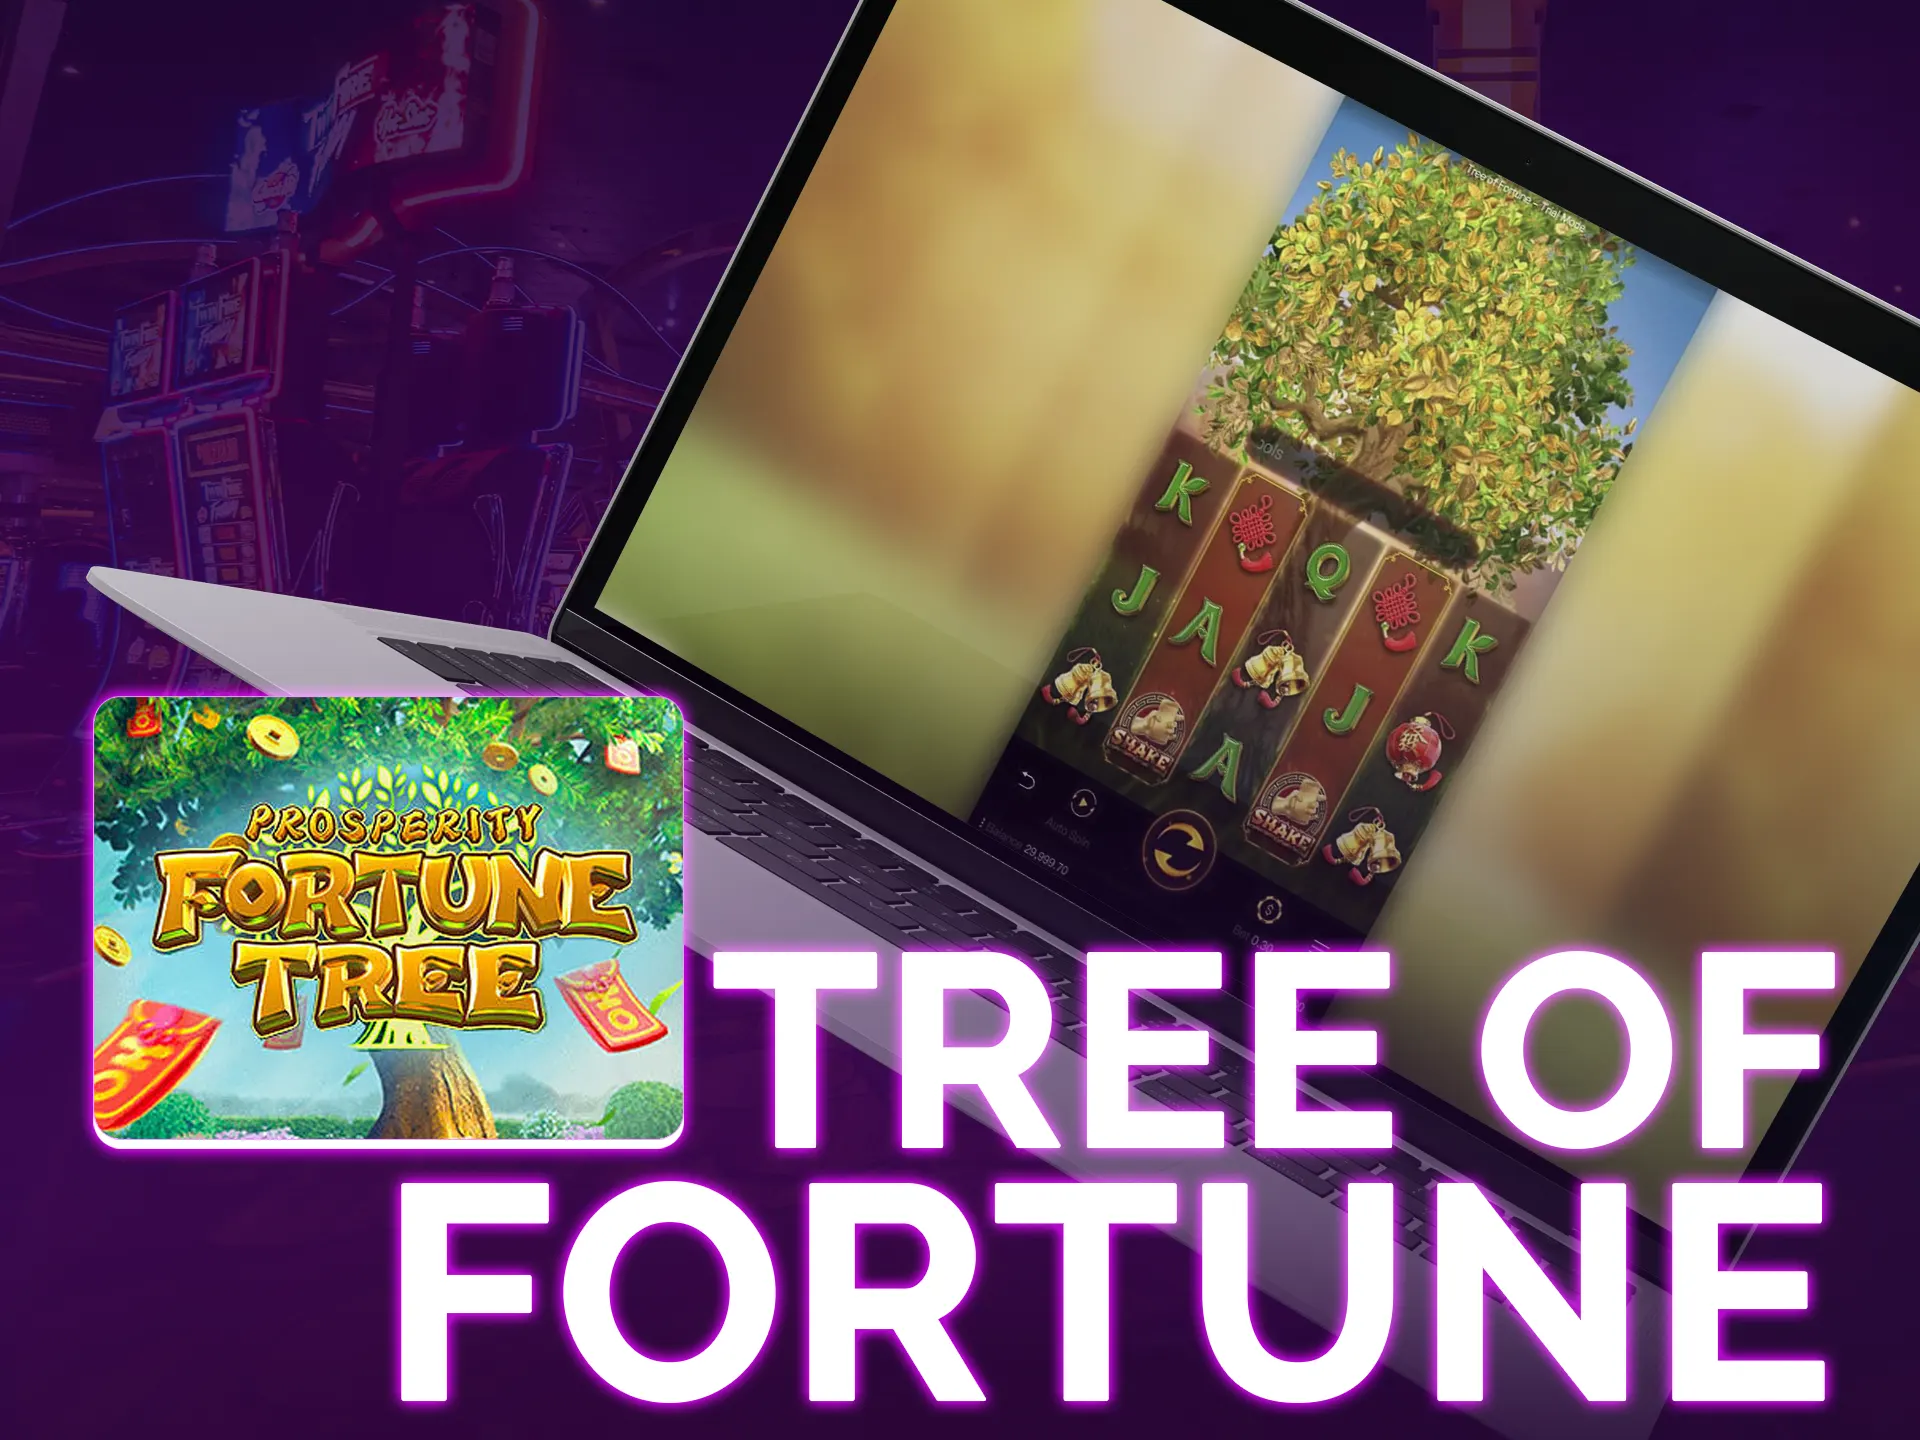 Tree of fortune it`s a chinese-themed slot with 5 reels, 30 paylines, wilds, and free spins.